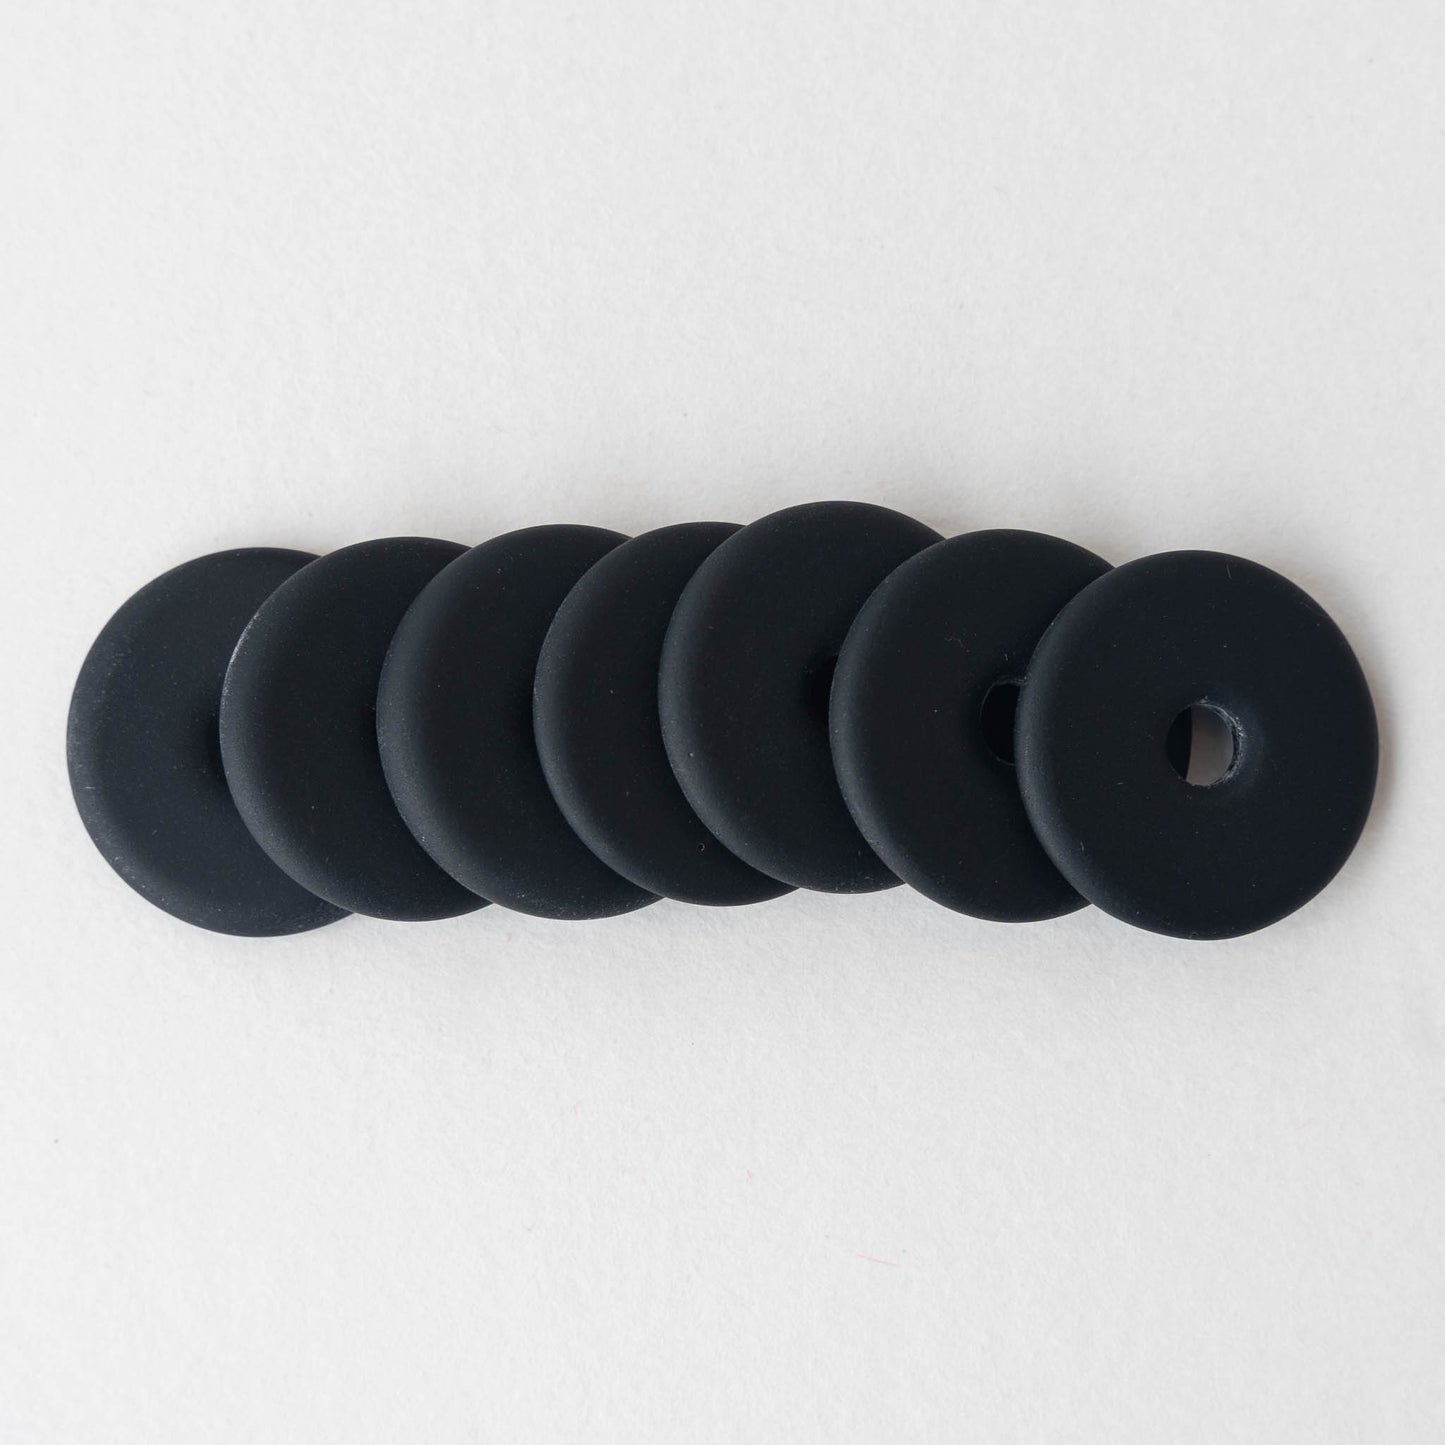 25mm Frosted Glass Donut - Black - 4 Beads